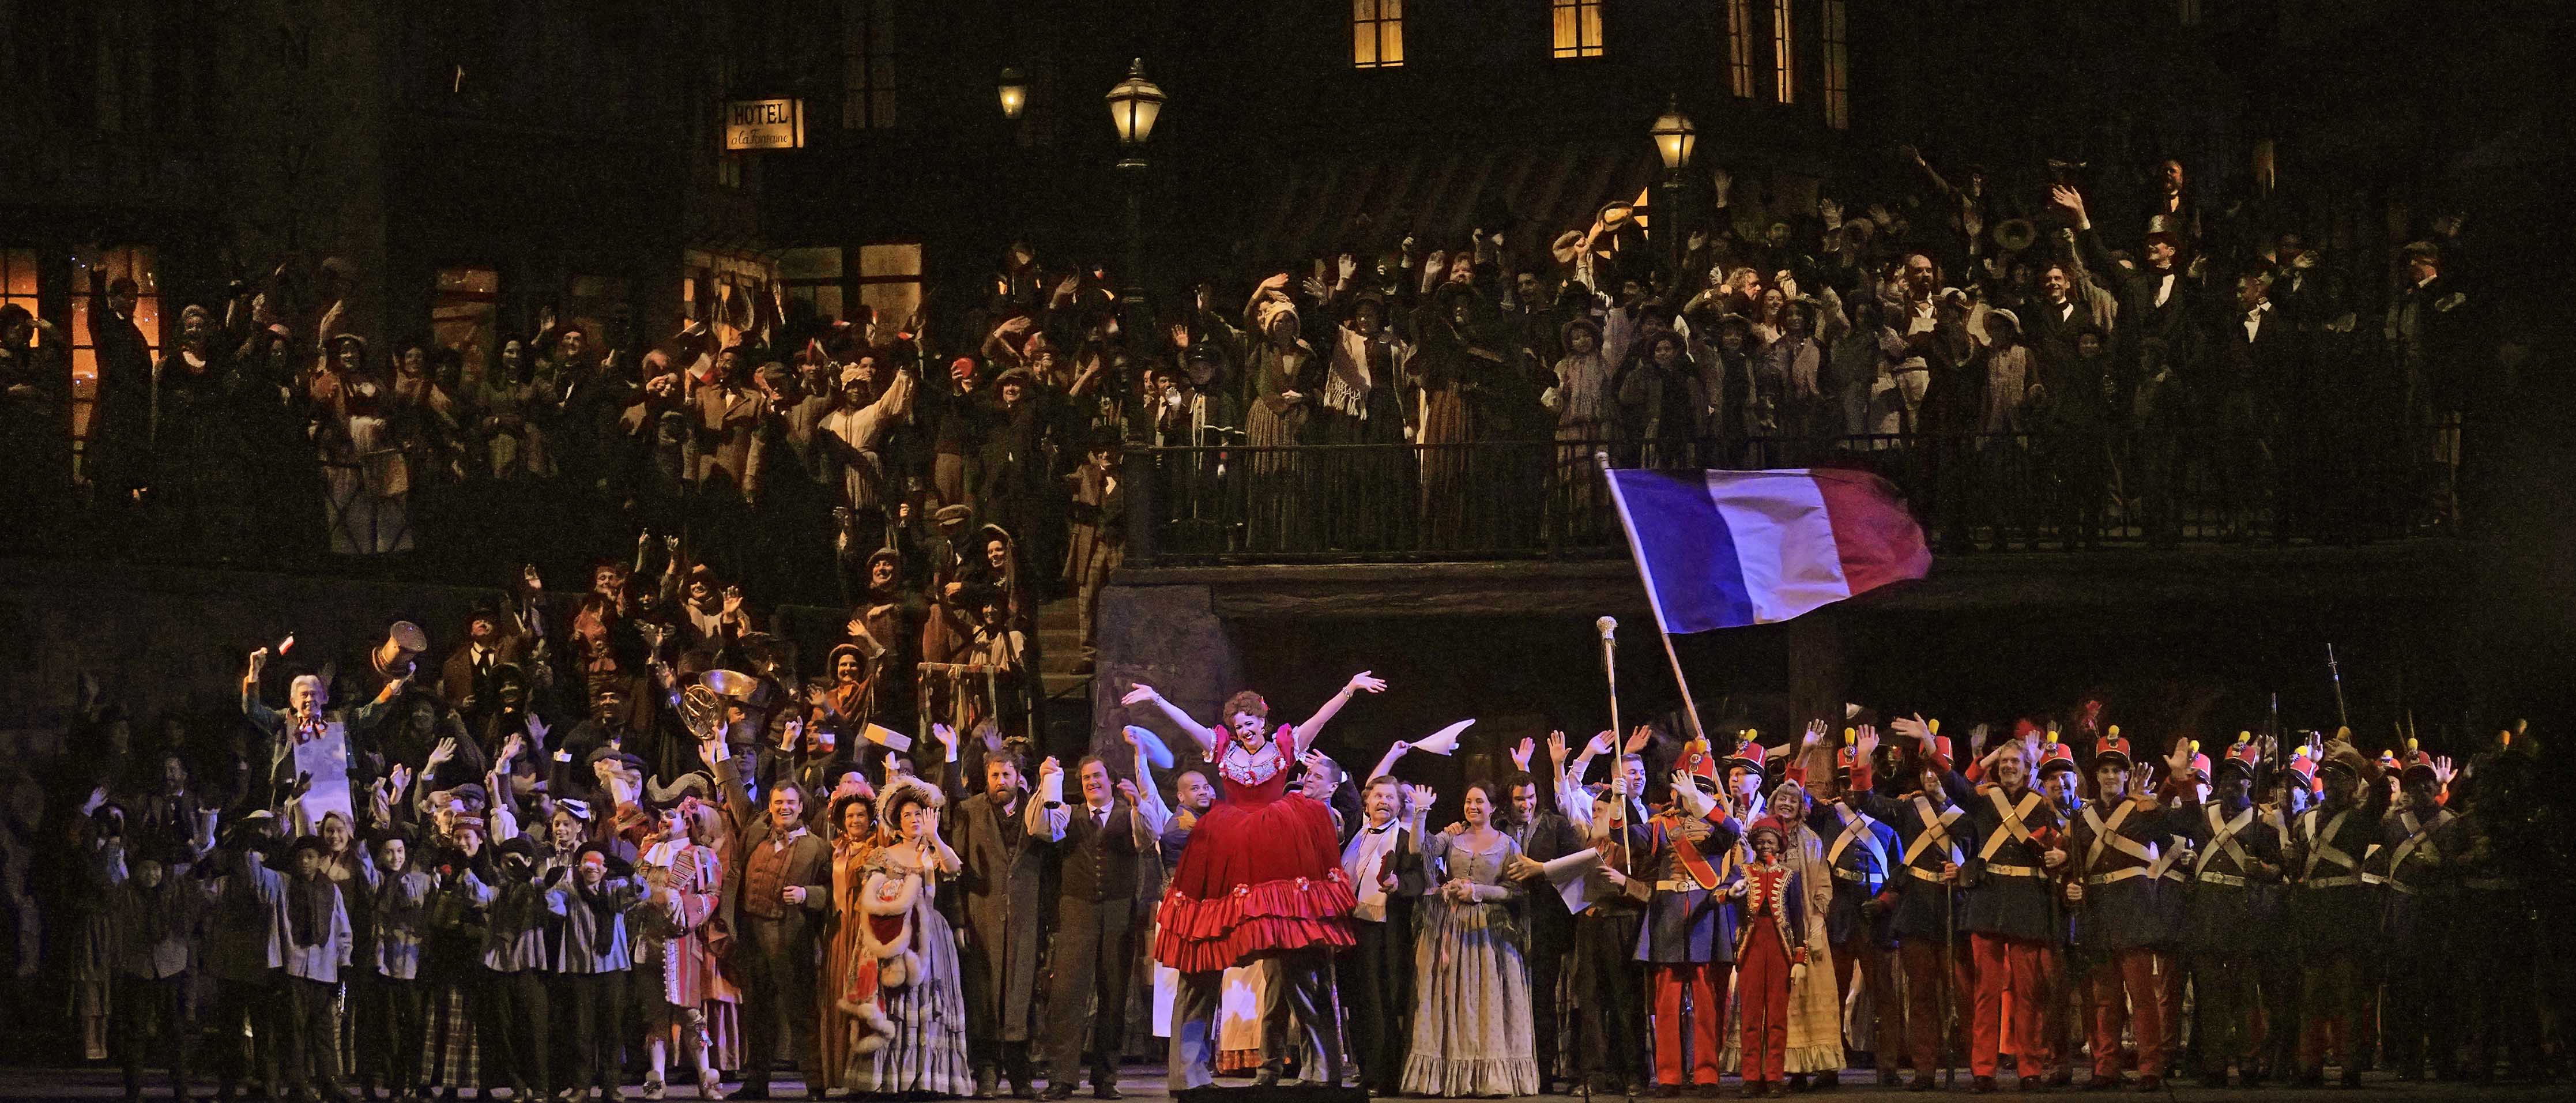 From a Met Opera production of "La Boheme," a large cast cover the stage, smiling and holding a French flag. Two men carry a woman in red at the center of the stage.